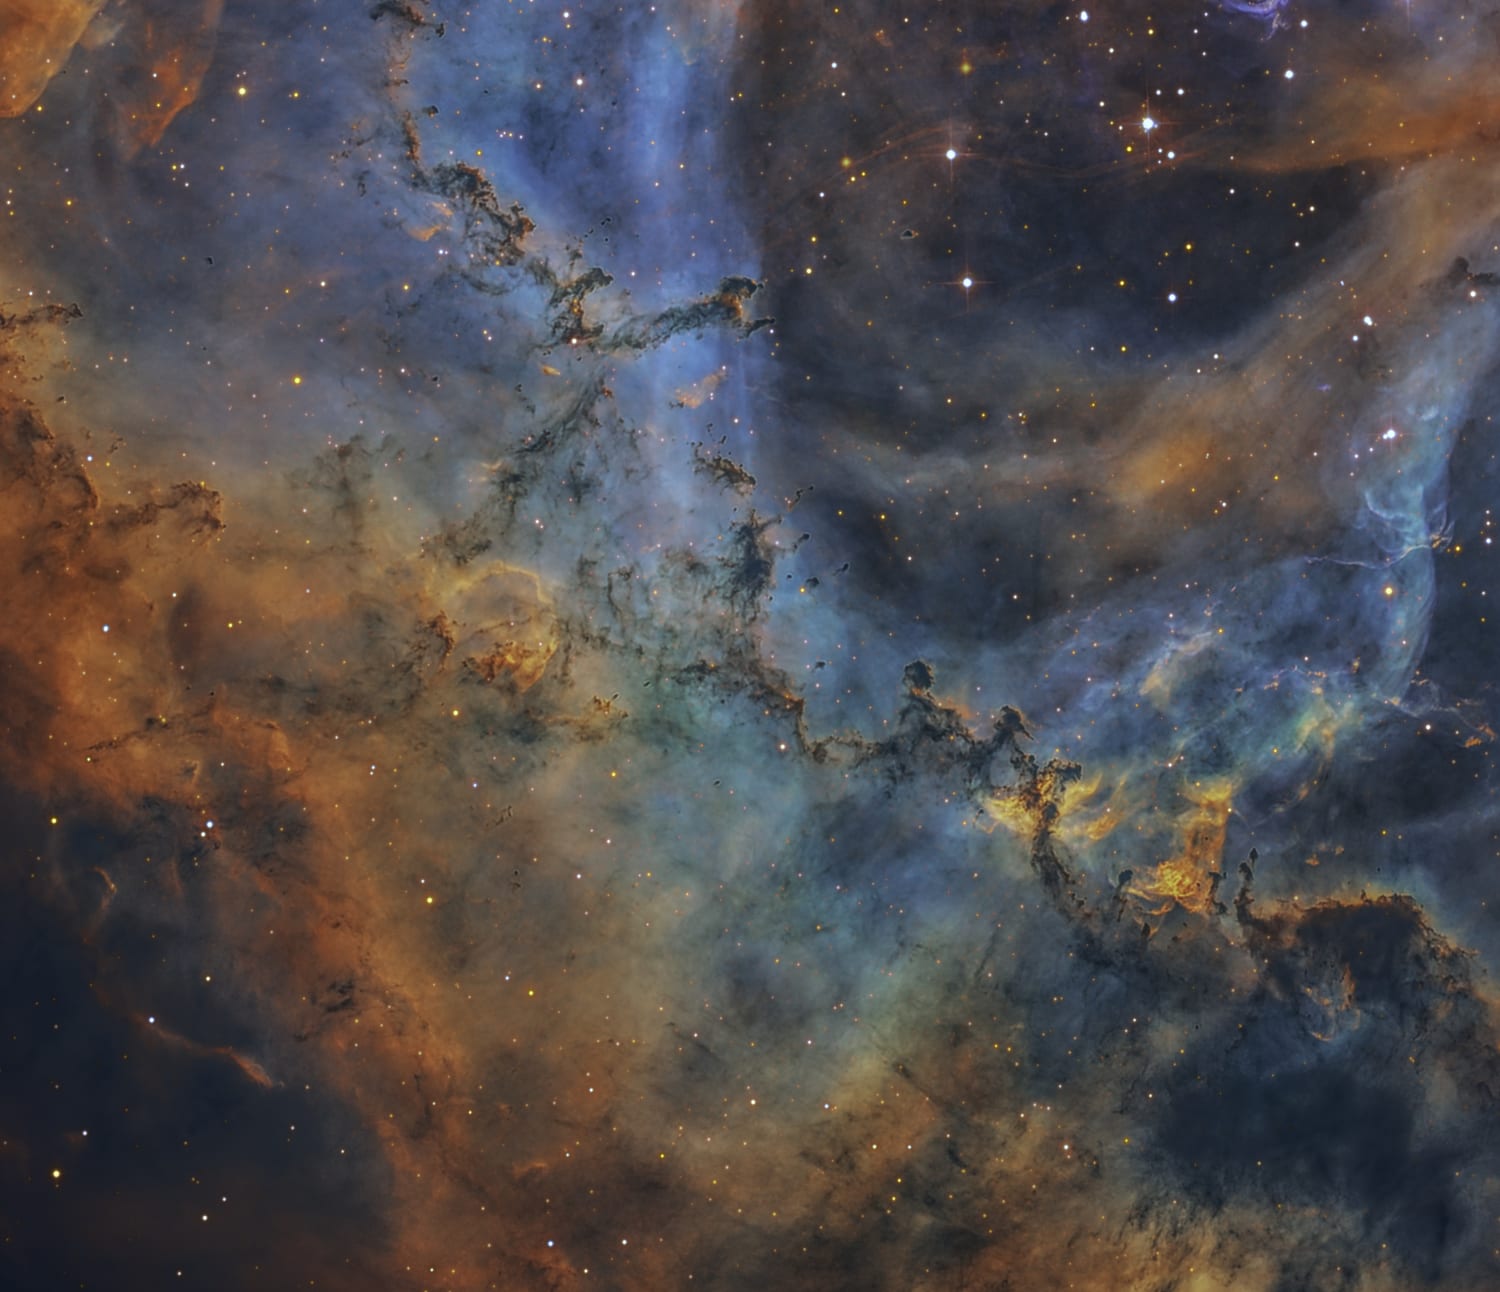 Using a 17 inch scope in the Atacama Desert, I was able to get this insanely detailed view of the Rosette Nebula